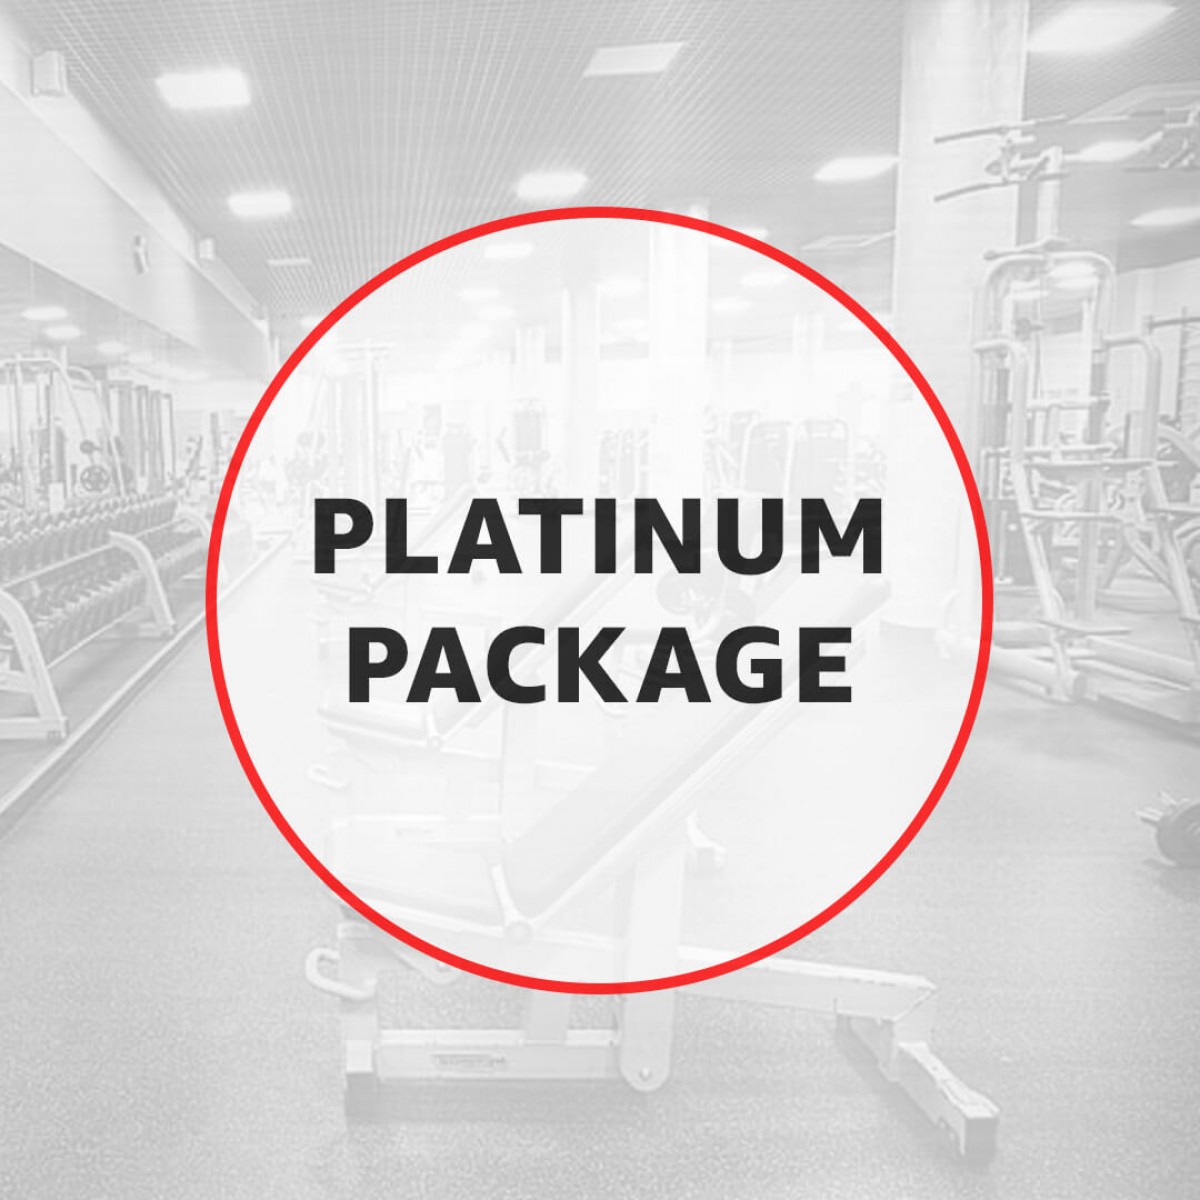 Society, Building & Club House - Platinum Package